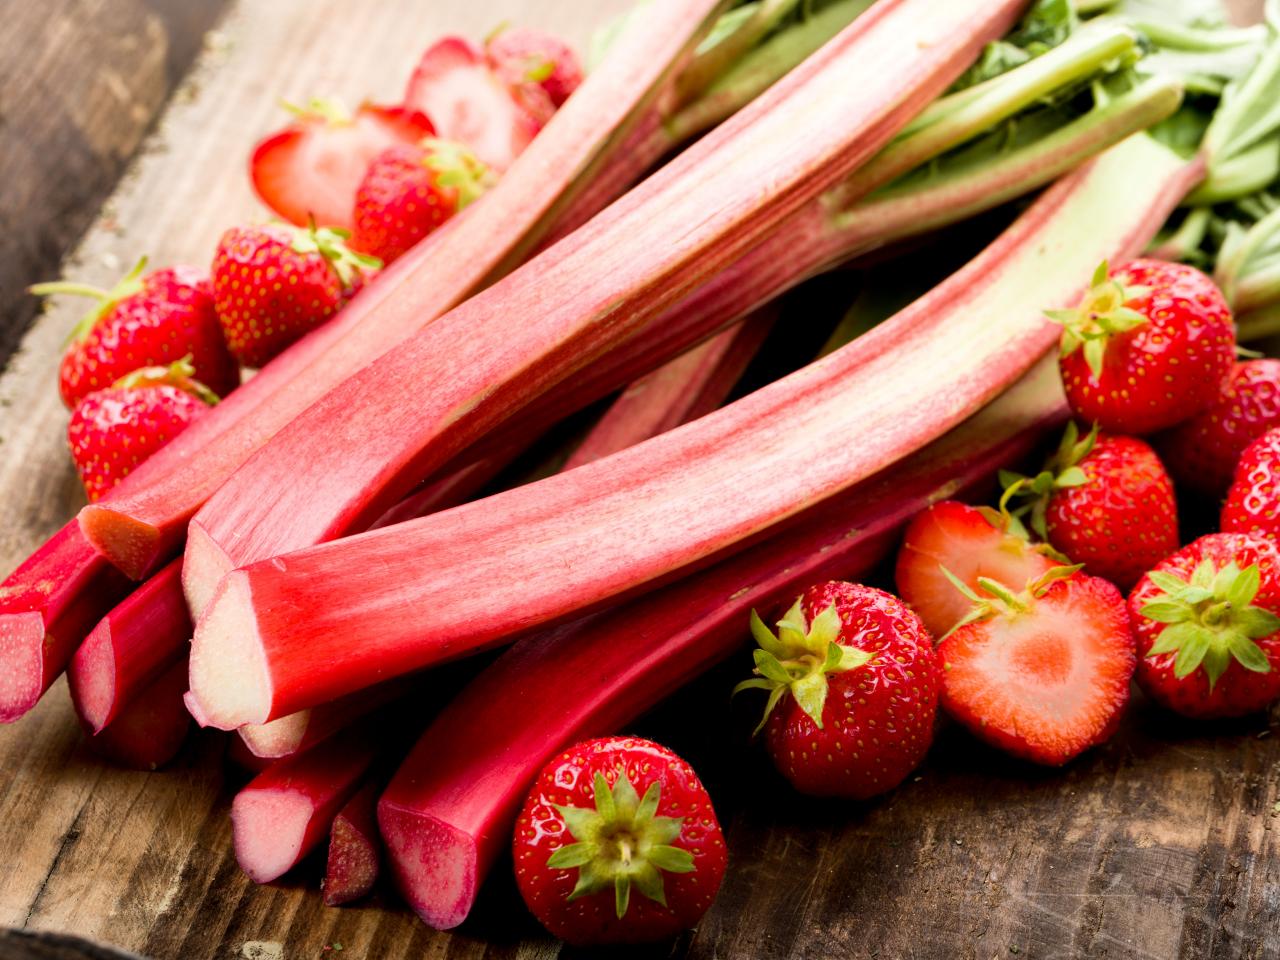 What Is Rhubarb? And What to Make with Rhubarb